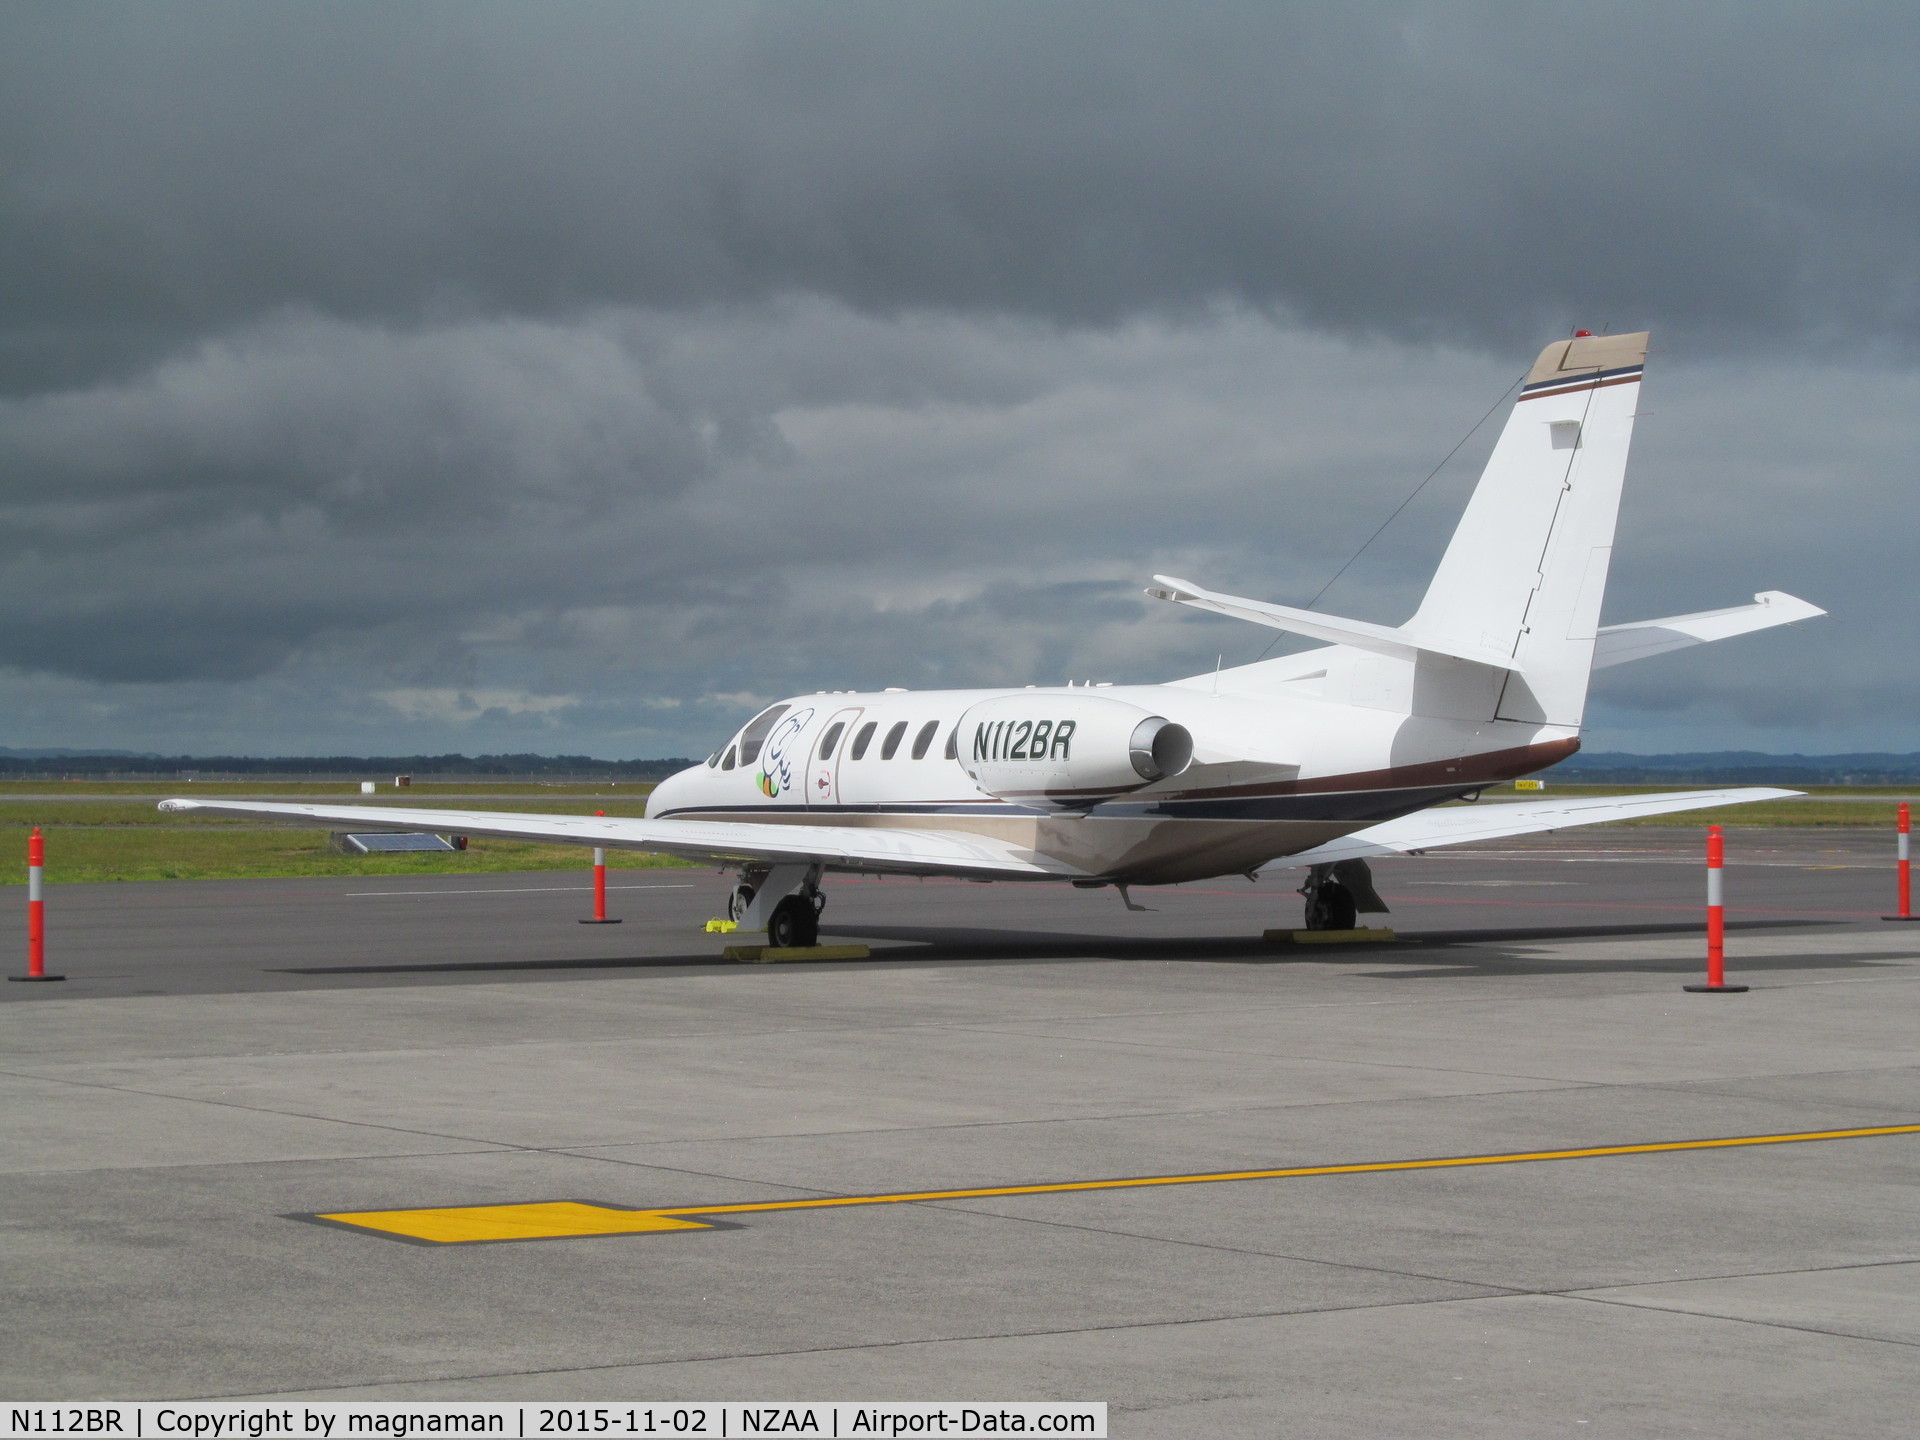 N112BR, 2006 Cessna 550 Citation Bravo C/N 550-1120, On apron at AKL at start of a long stay